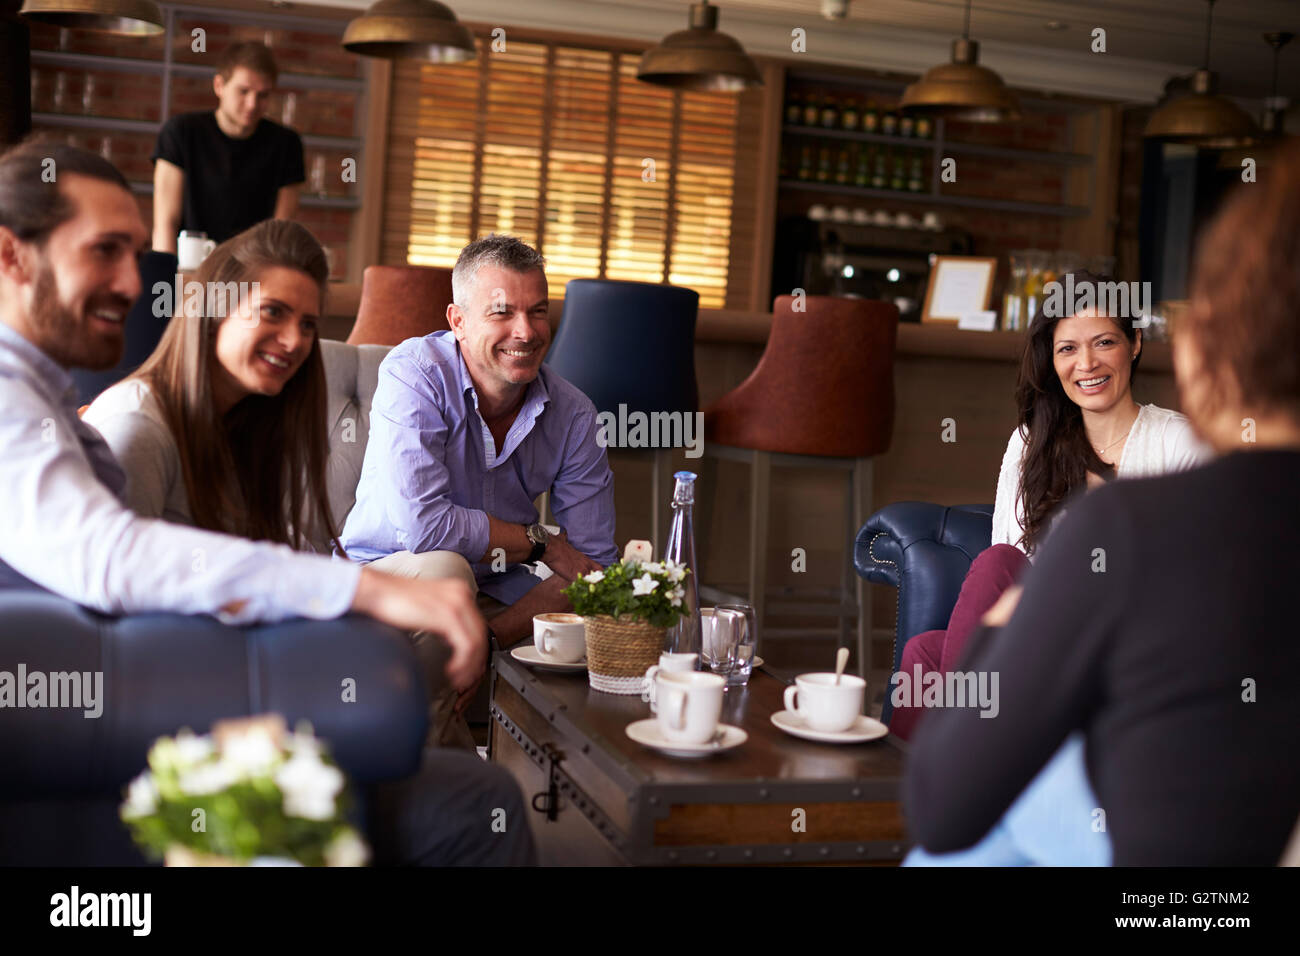 Group Of Friends Meeting For Coffee In Bar Stock Photo